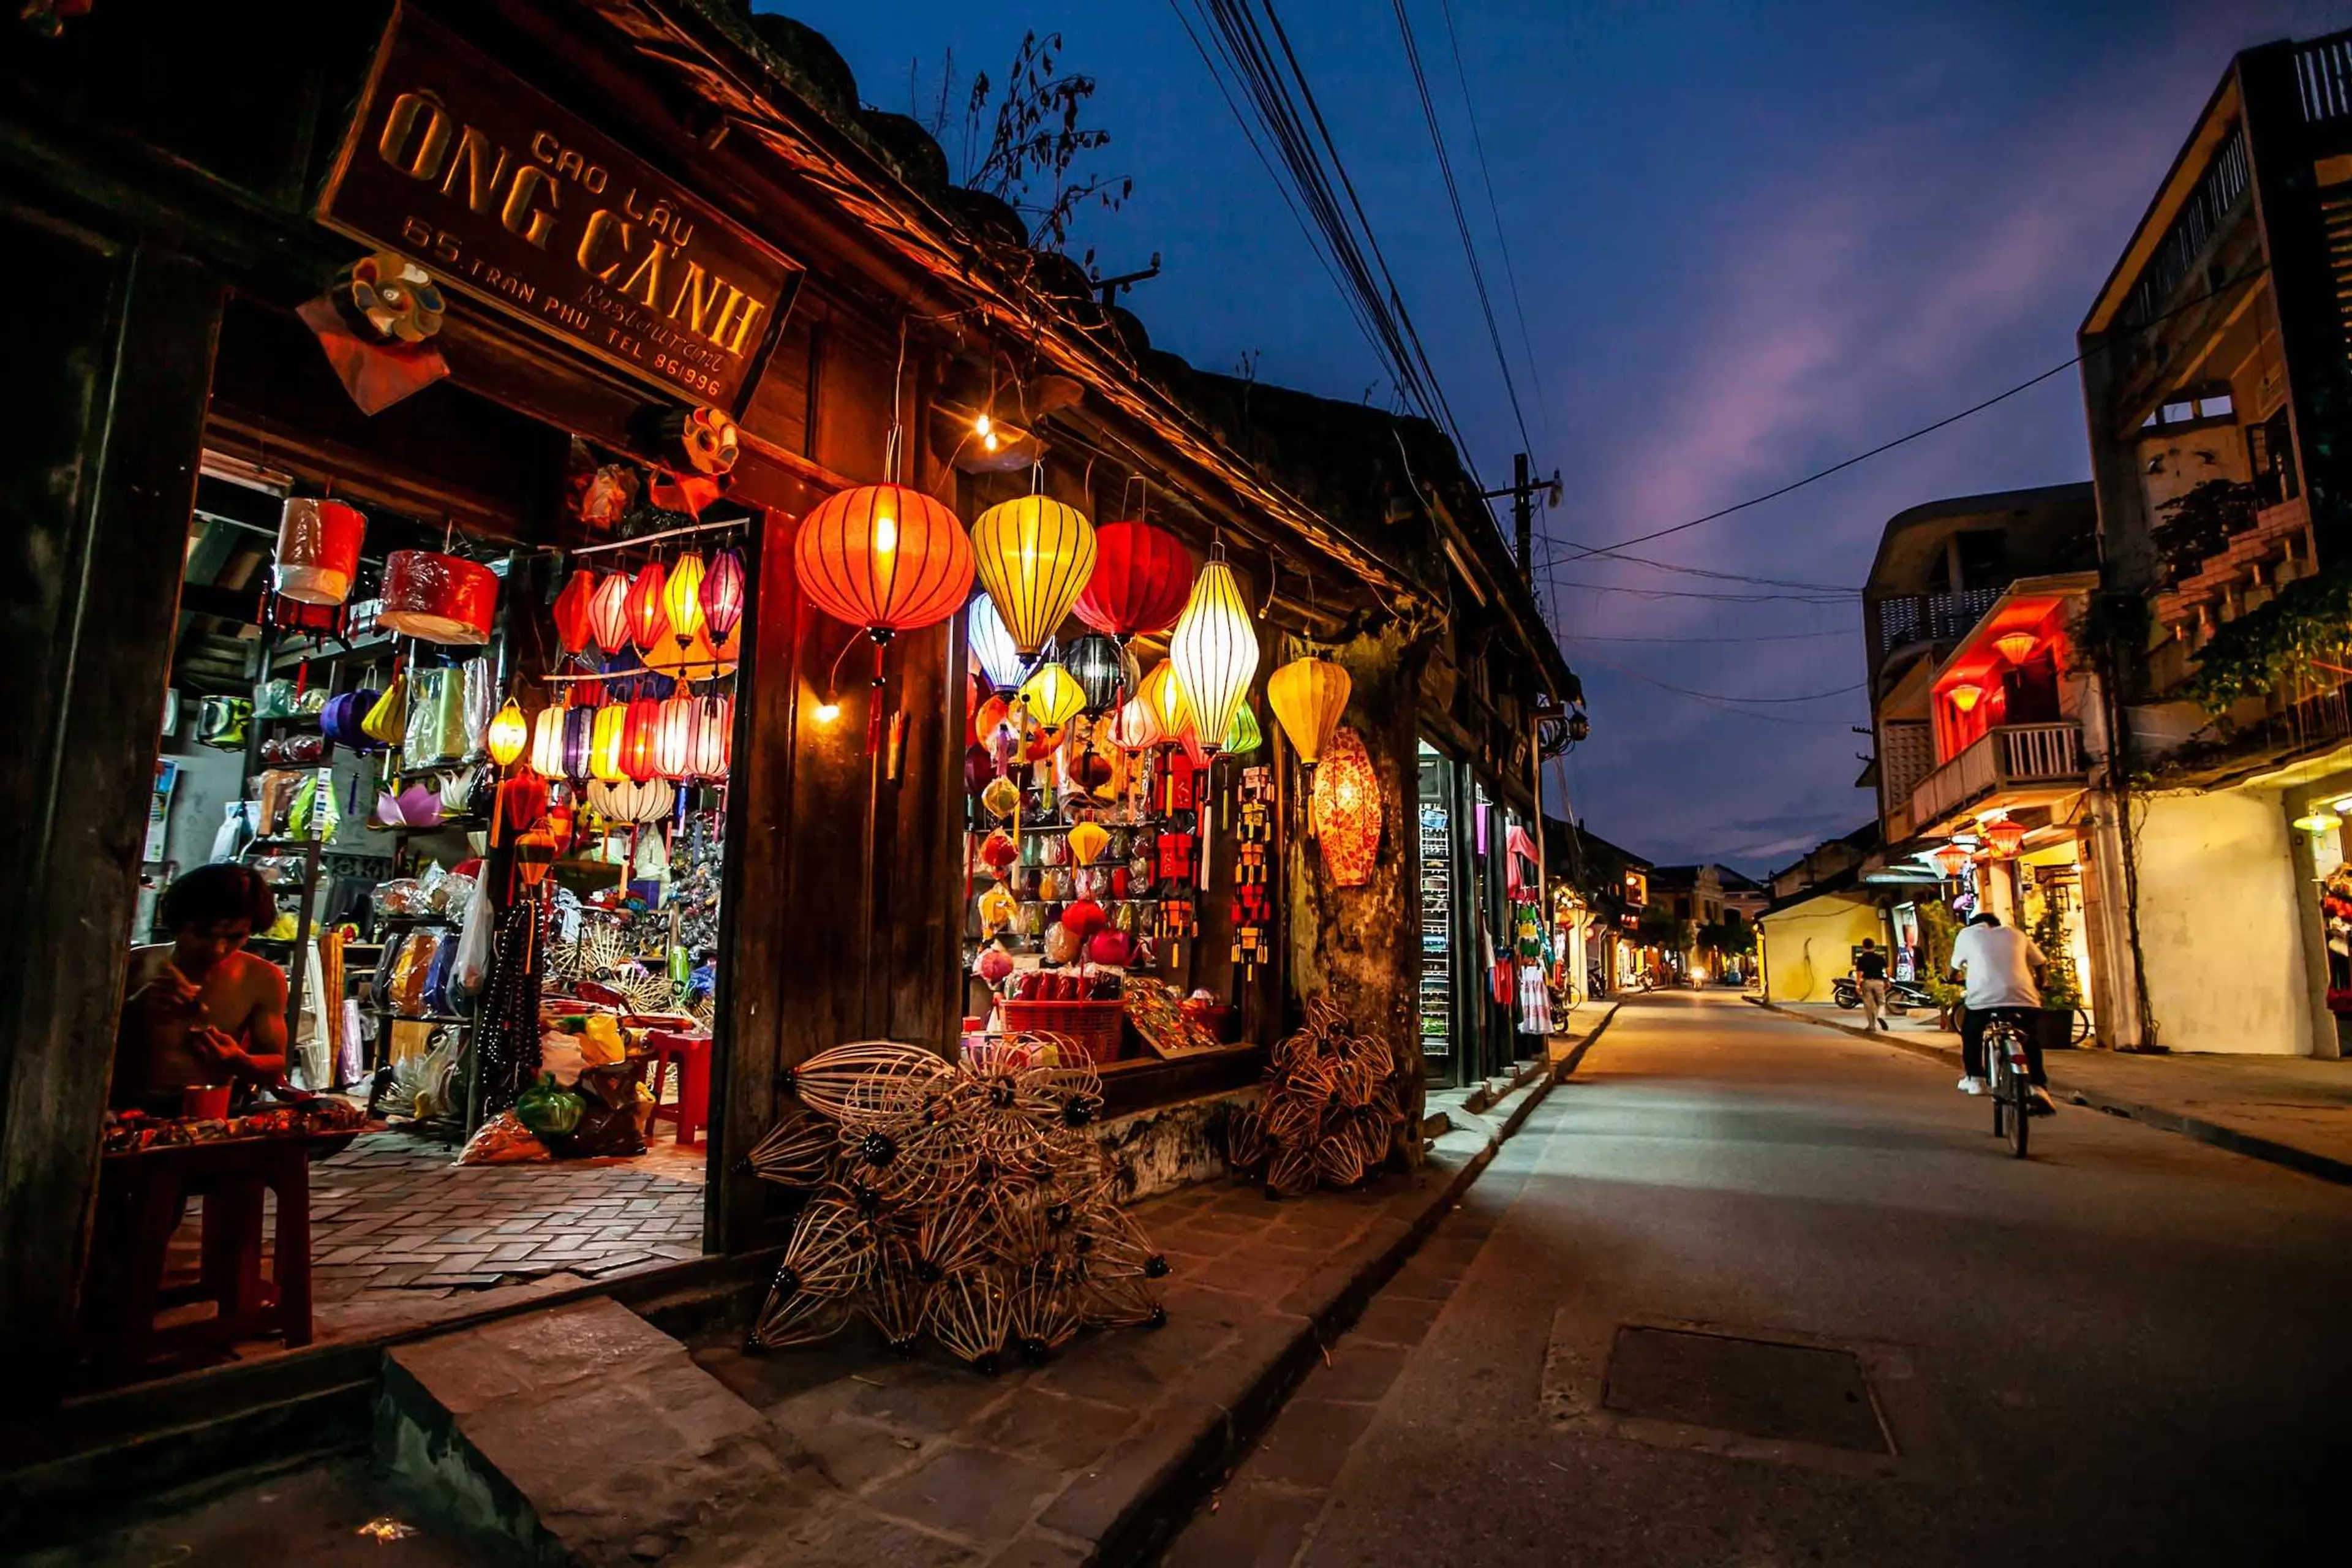 Hoi An is famous for the traditional handmade lantern